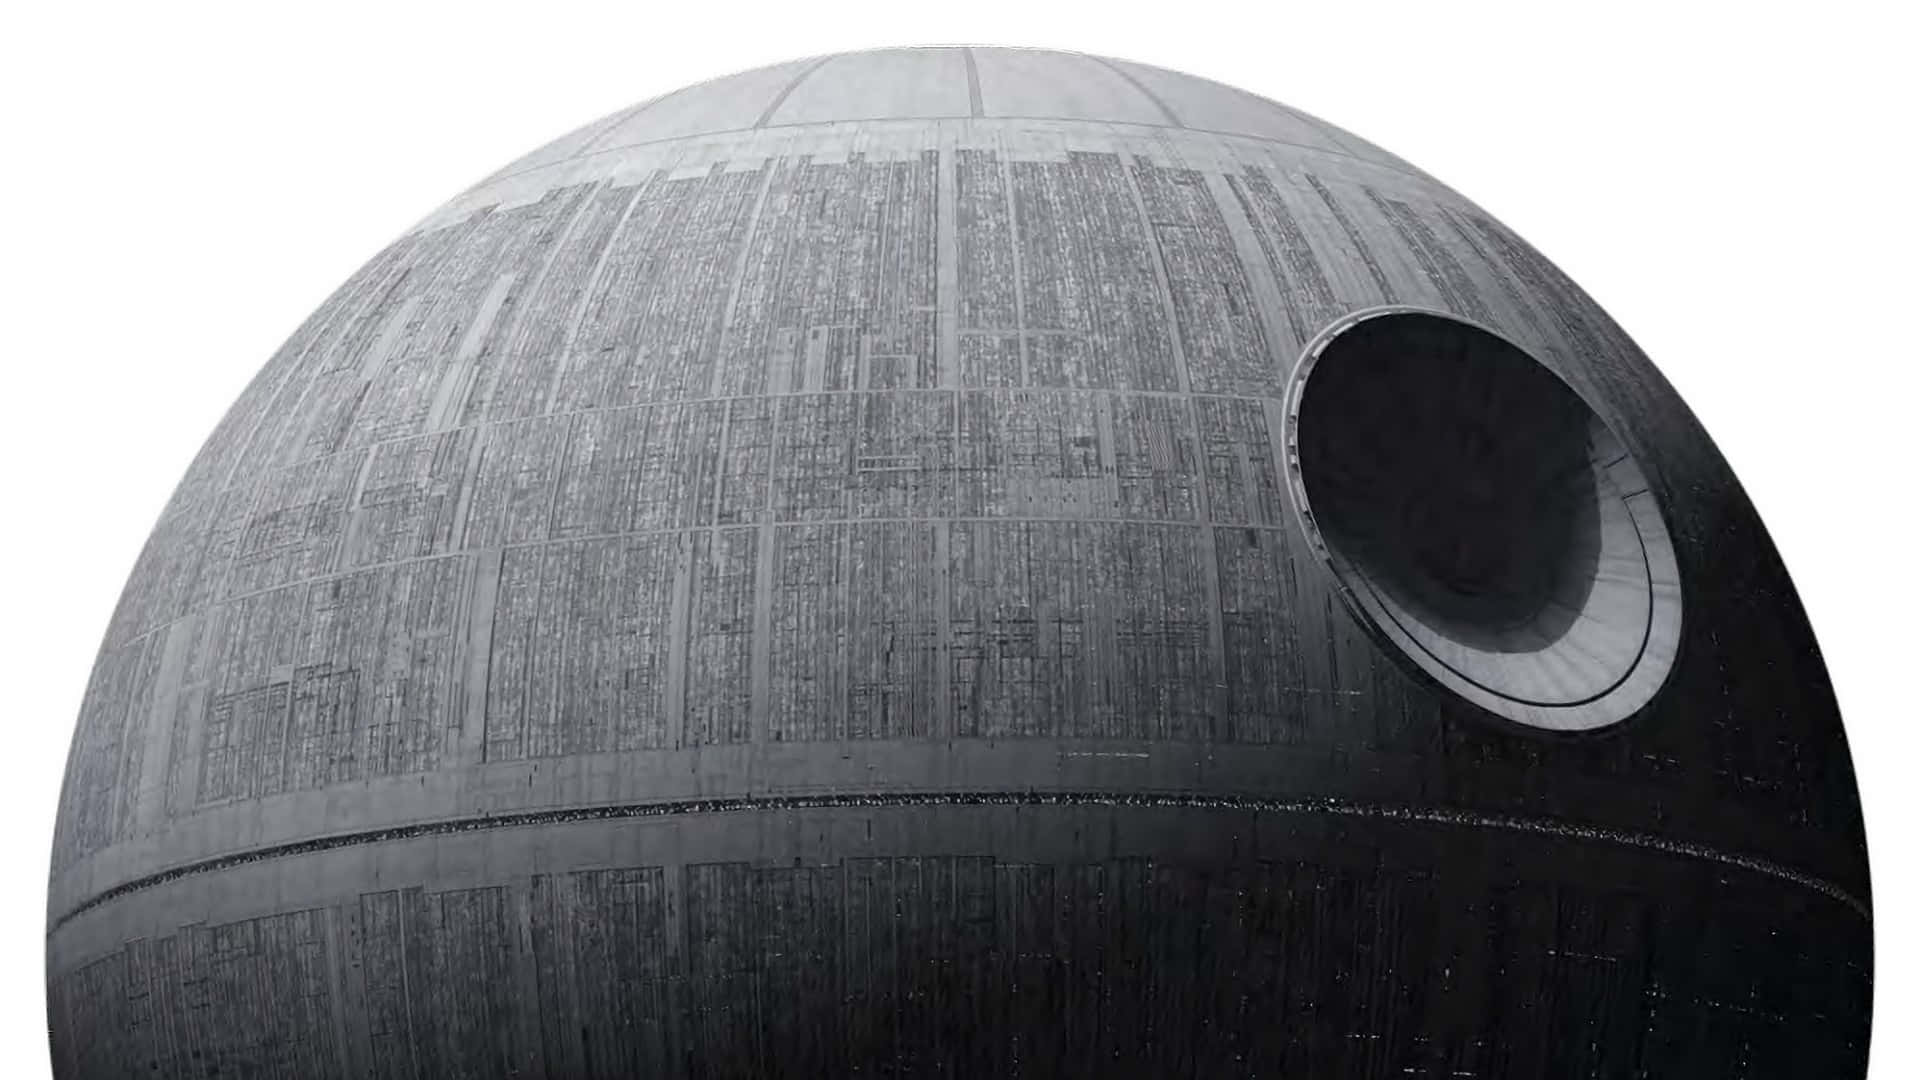 A Star Wars Death Star Is Shown On A White Background